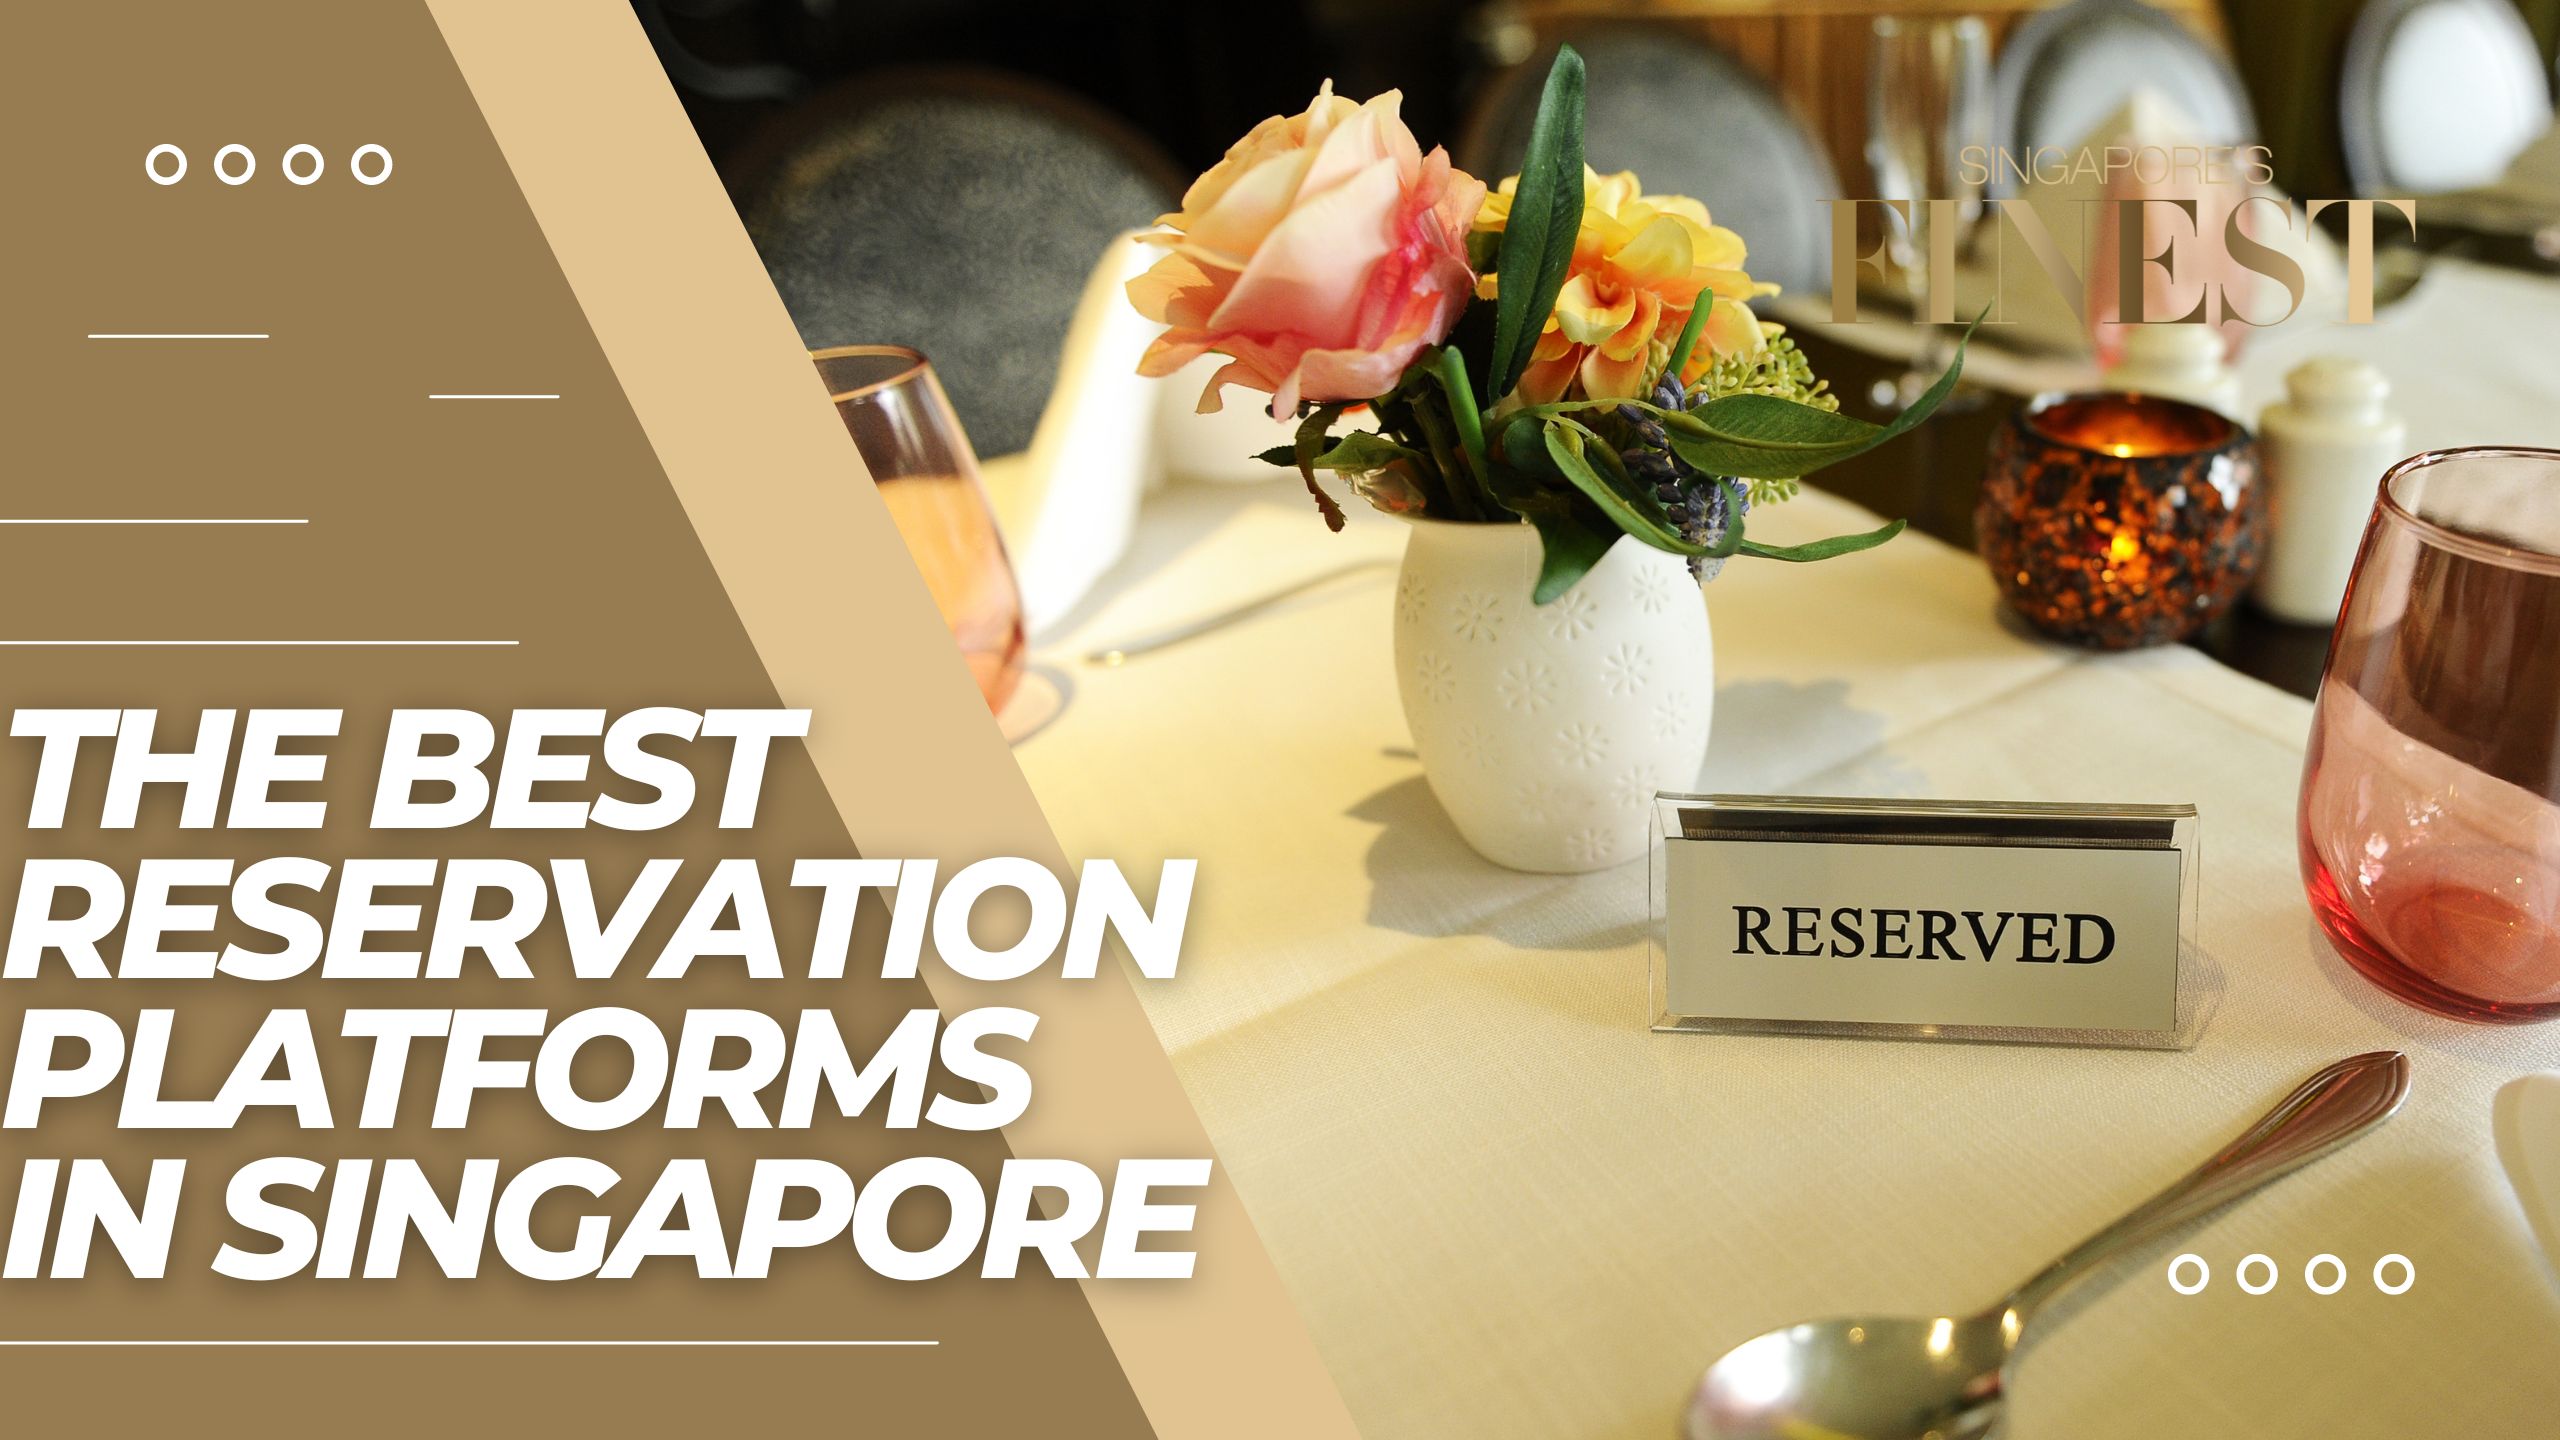 The Finest Reservation Platforms in Singapore